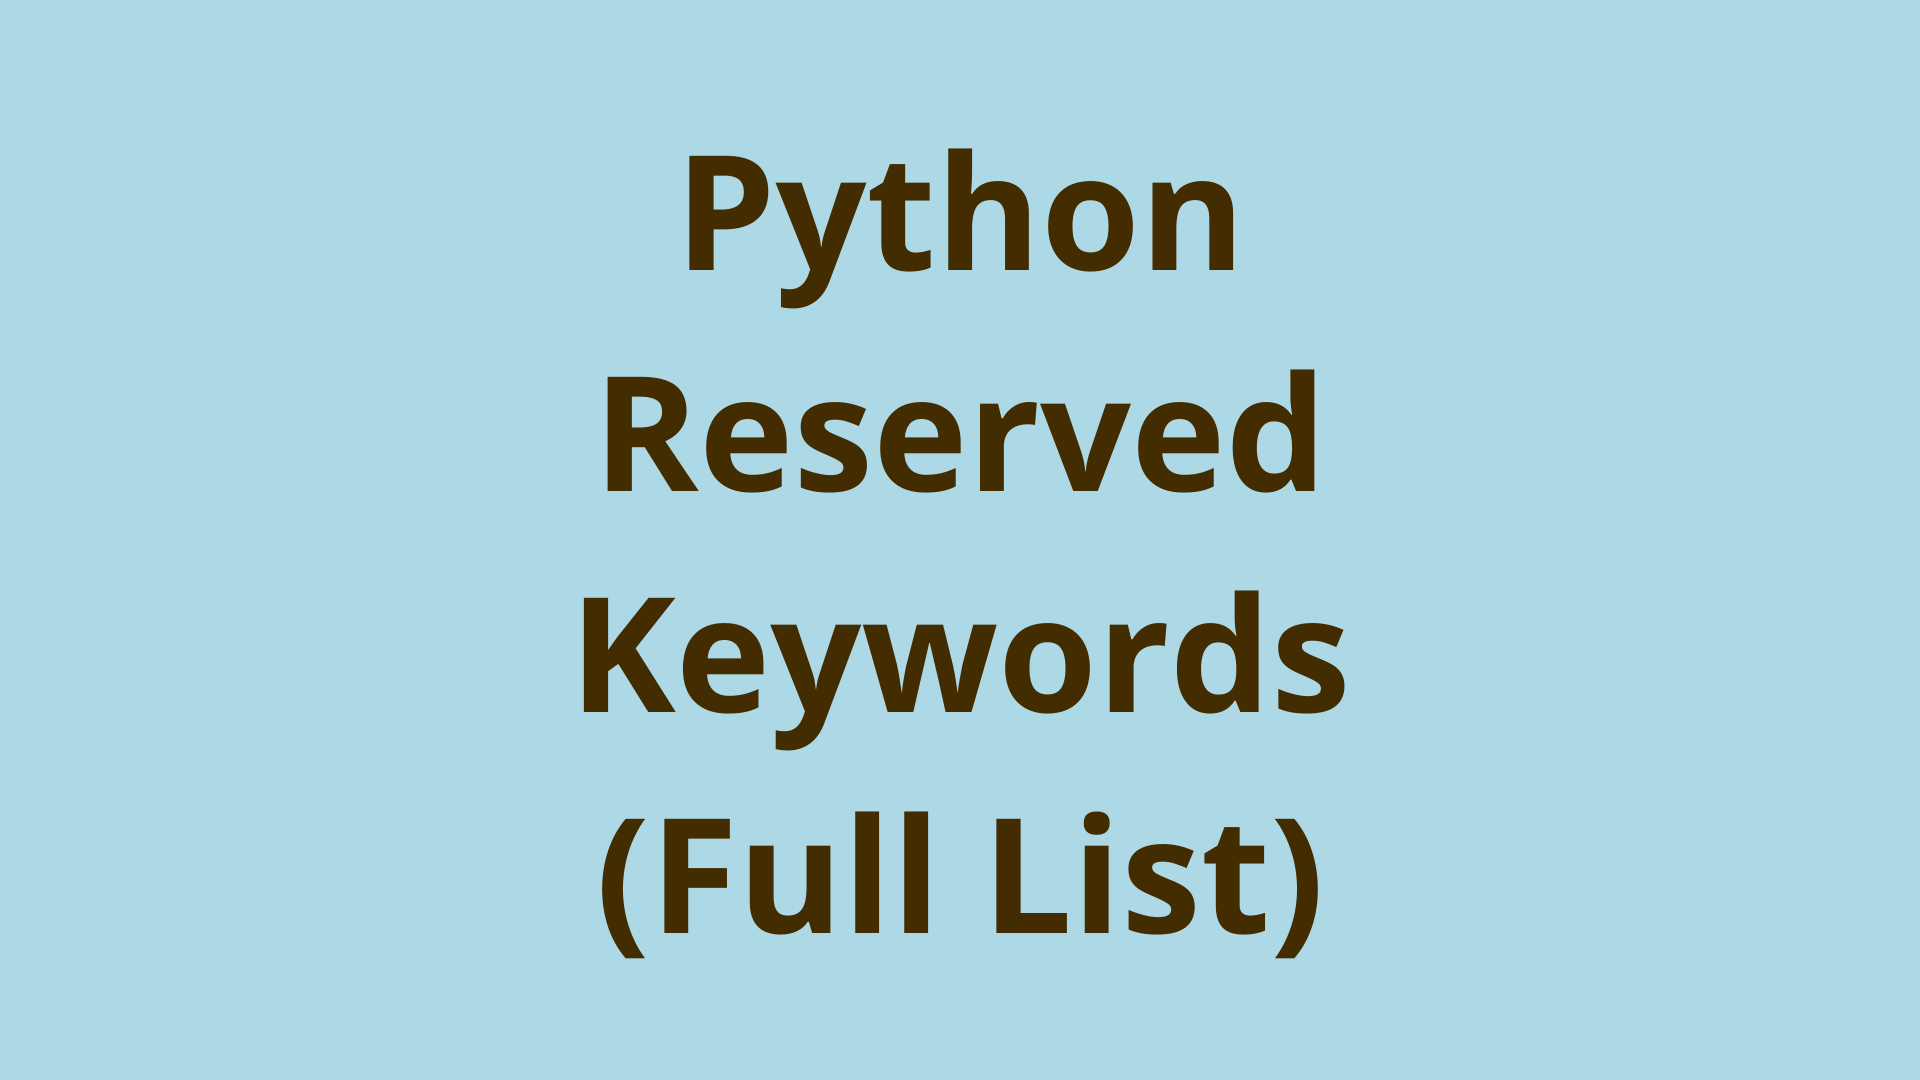 Image of Python Reserved Keywords (Full List) | Initial Commit